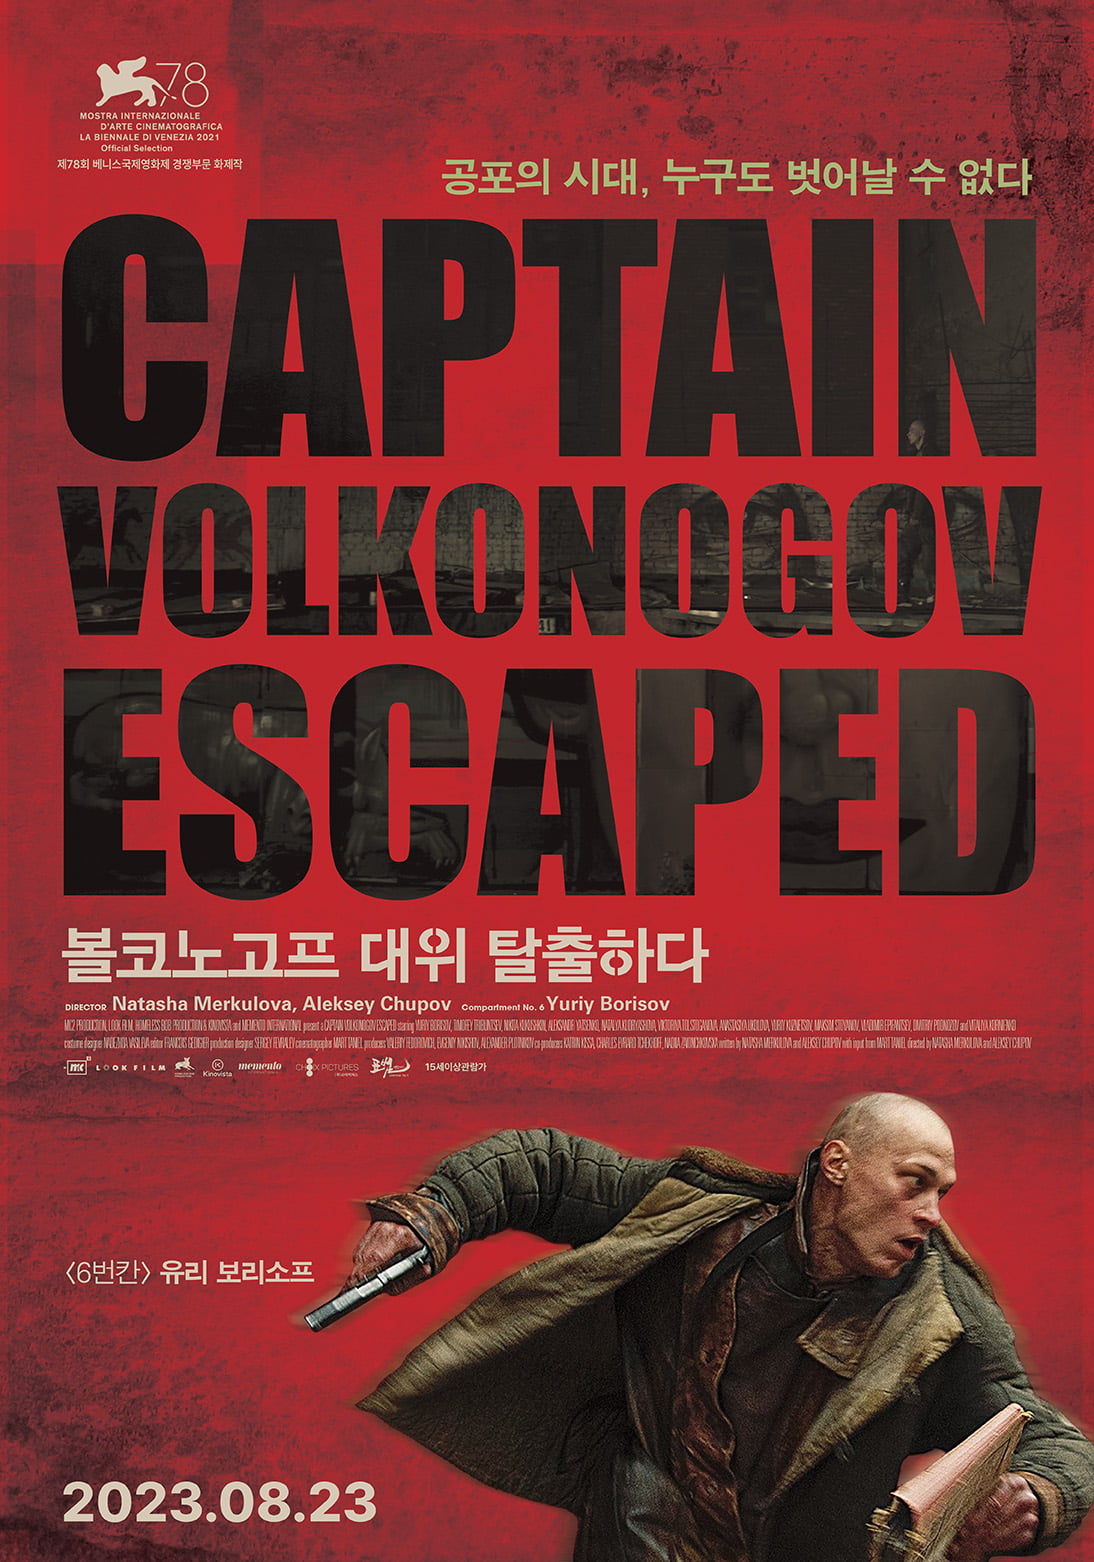 Movie 'Captain Volkonogov Escaped', the bloody history of Stalin's reign of terror